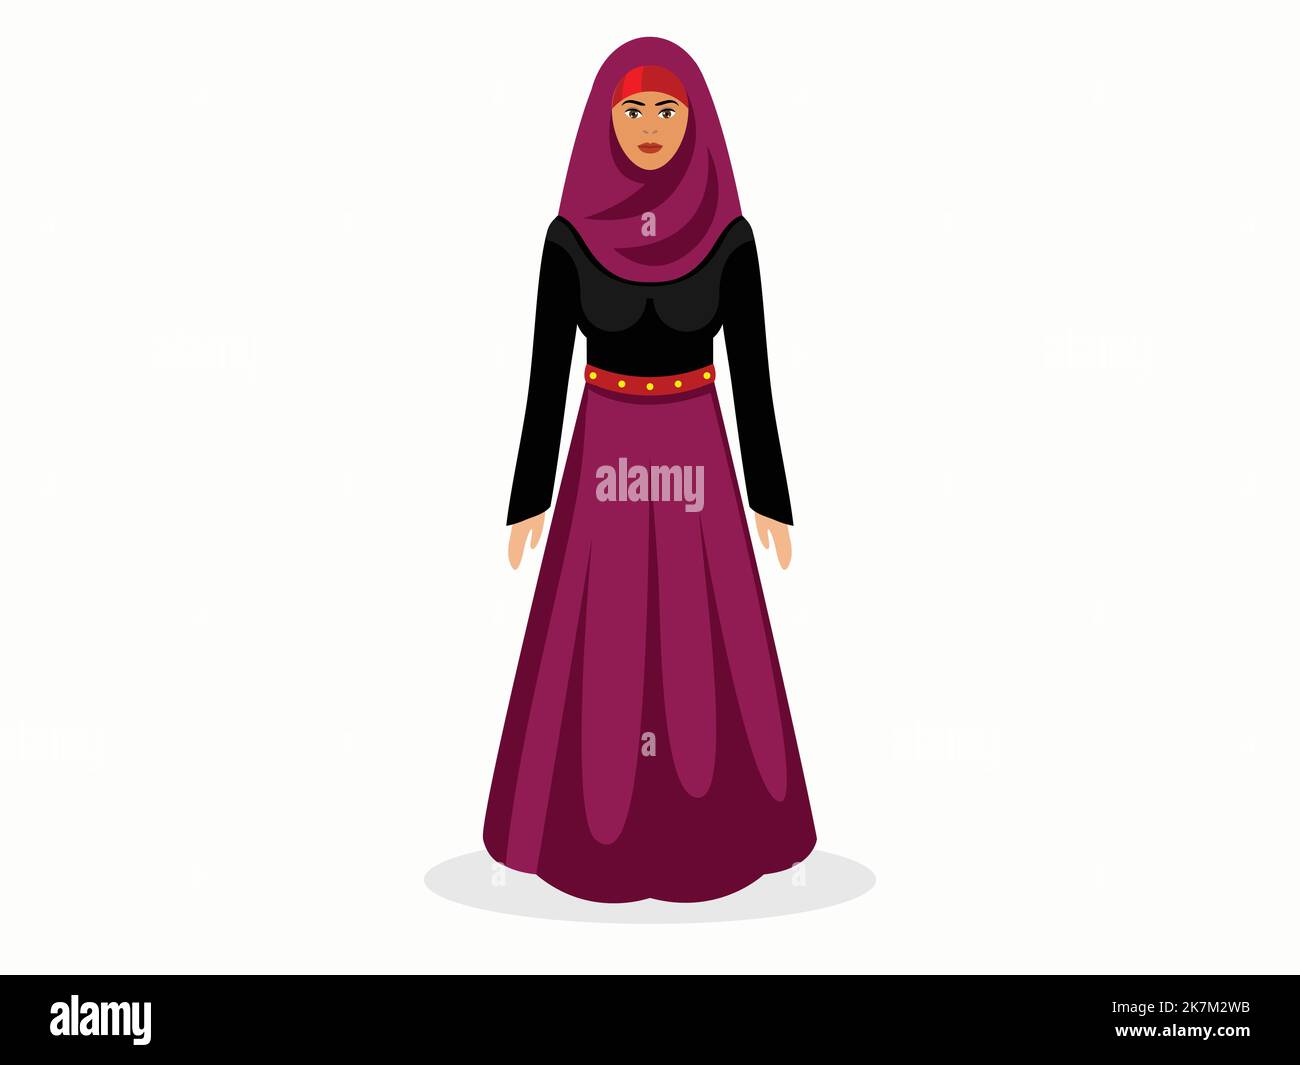 Black and red color outfit Muslim women use it to cover body and head, vector character illustration Stock Vector